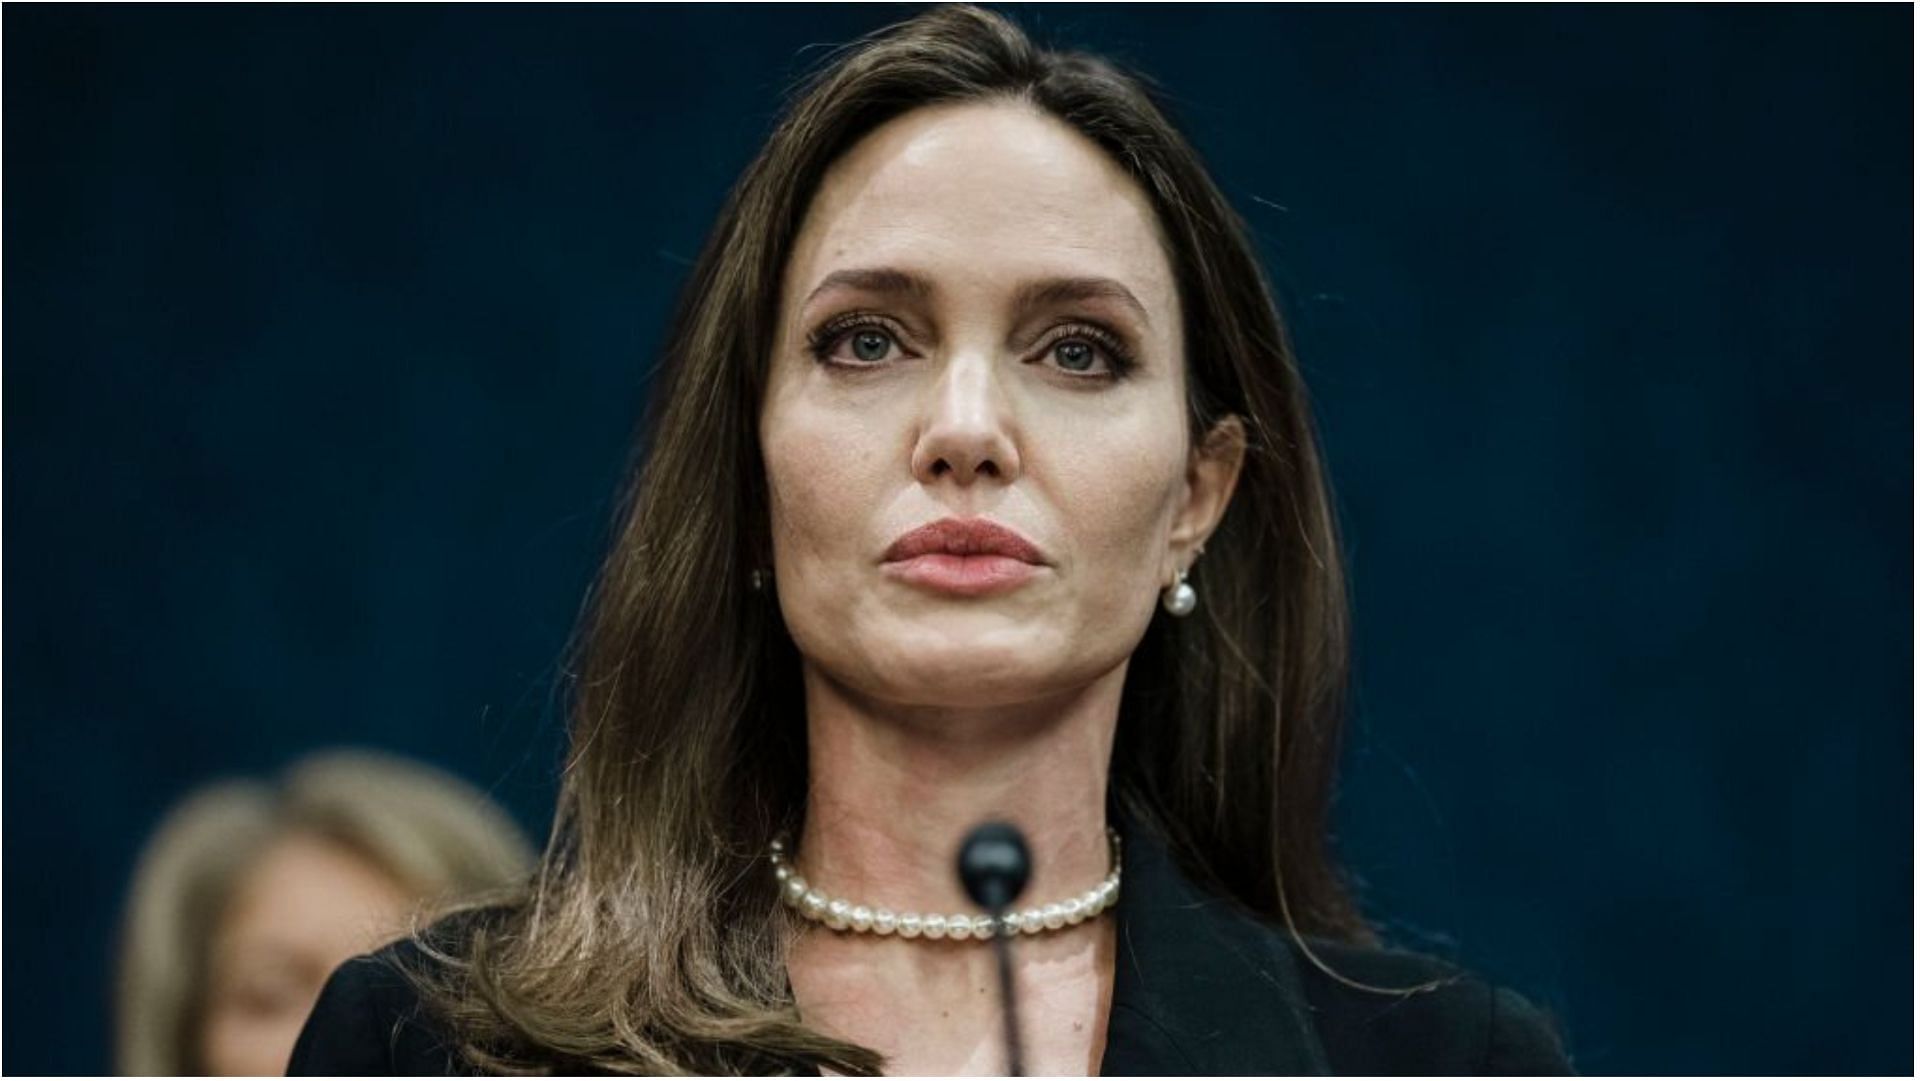 Angelina Jolie sued the FBI for stopping their investigation against Brad Pitt (Image via Kent Nishimura/Getty Images)